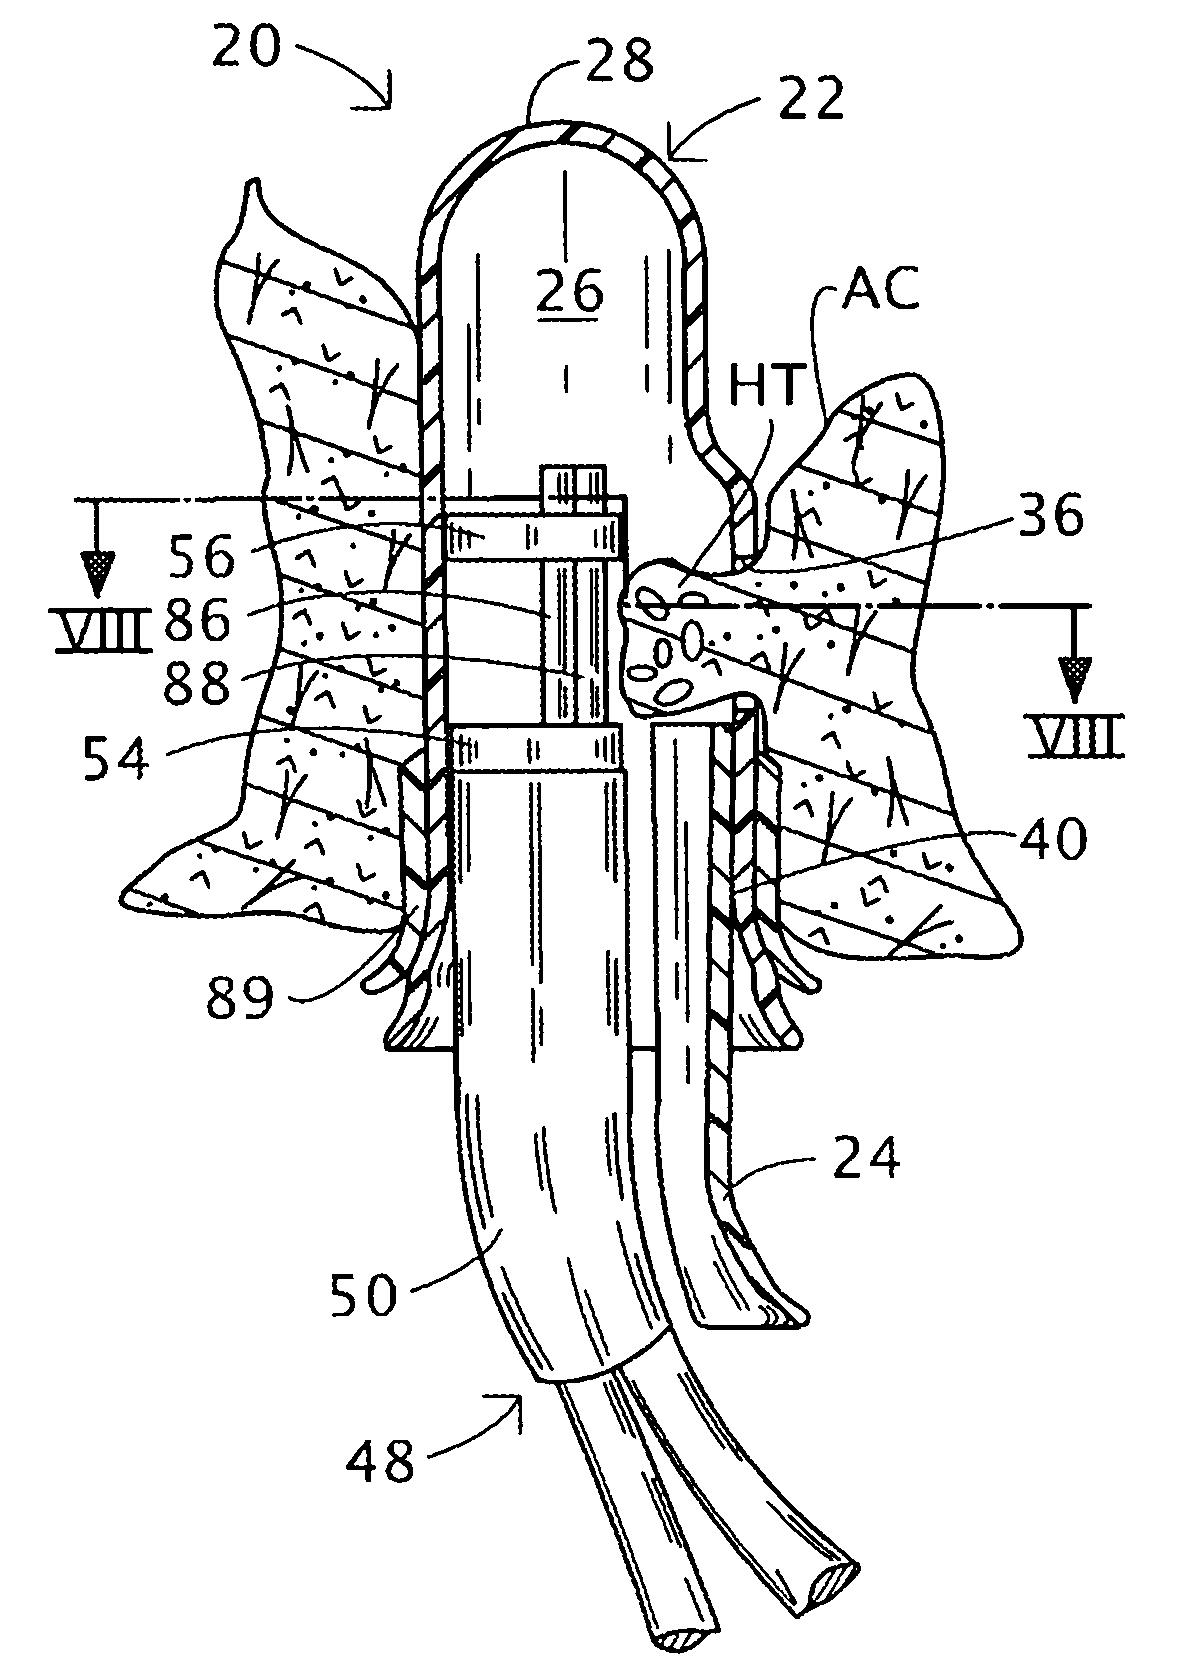 Hemorrhoids treatment method and associated instrument assembly including anoscope and cofunctioning tissue occlusion device